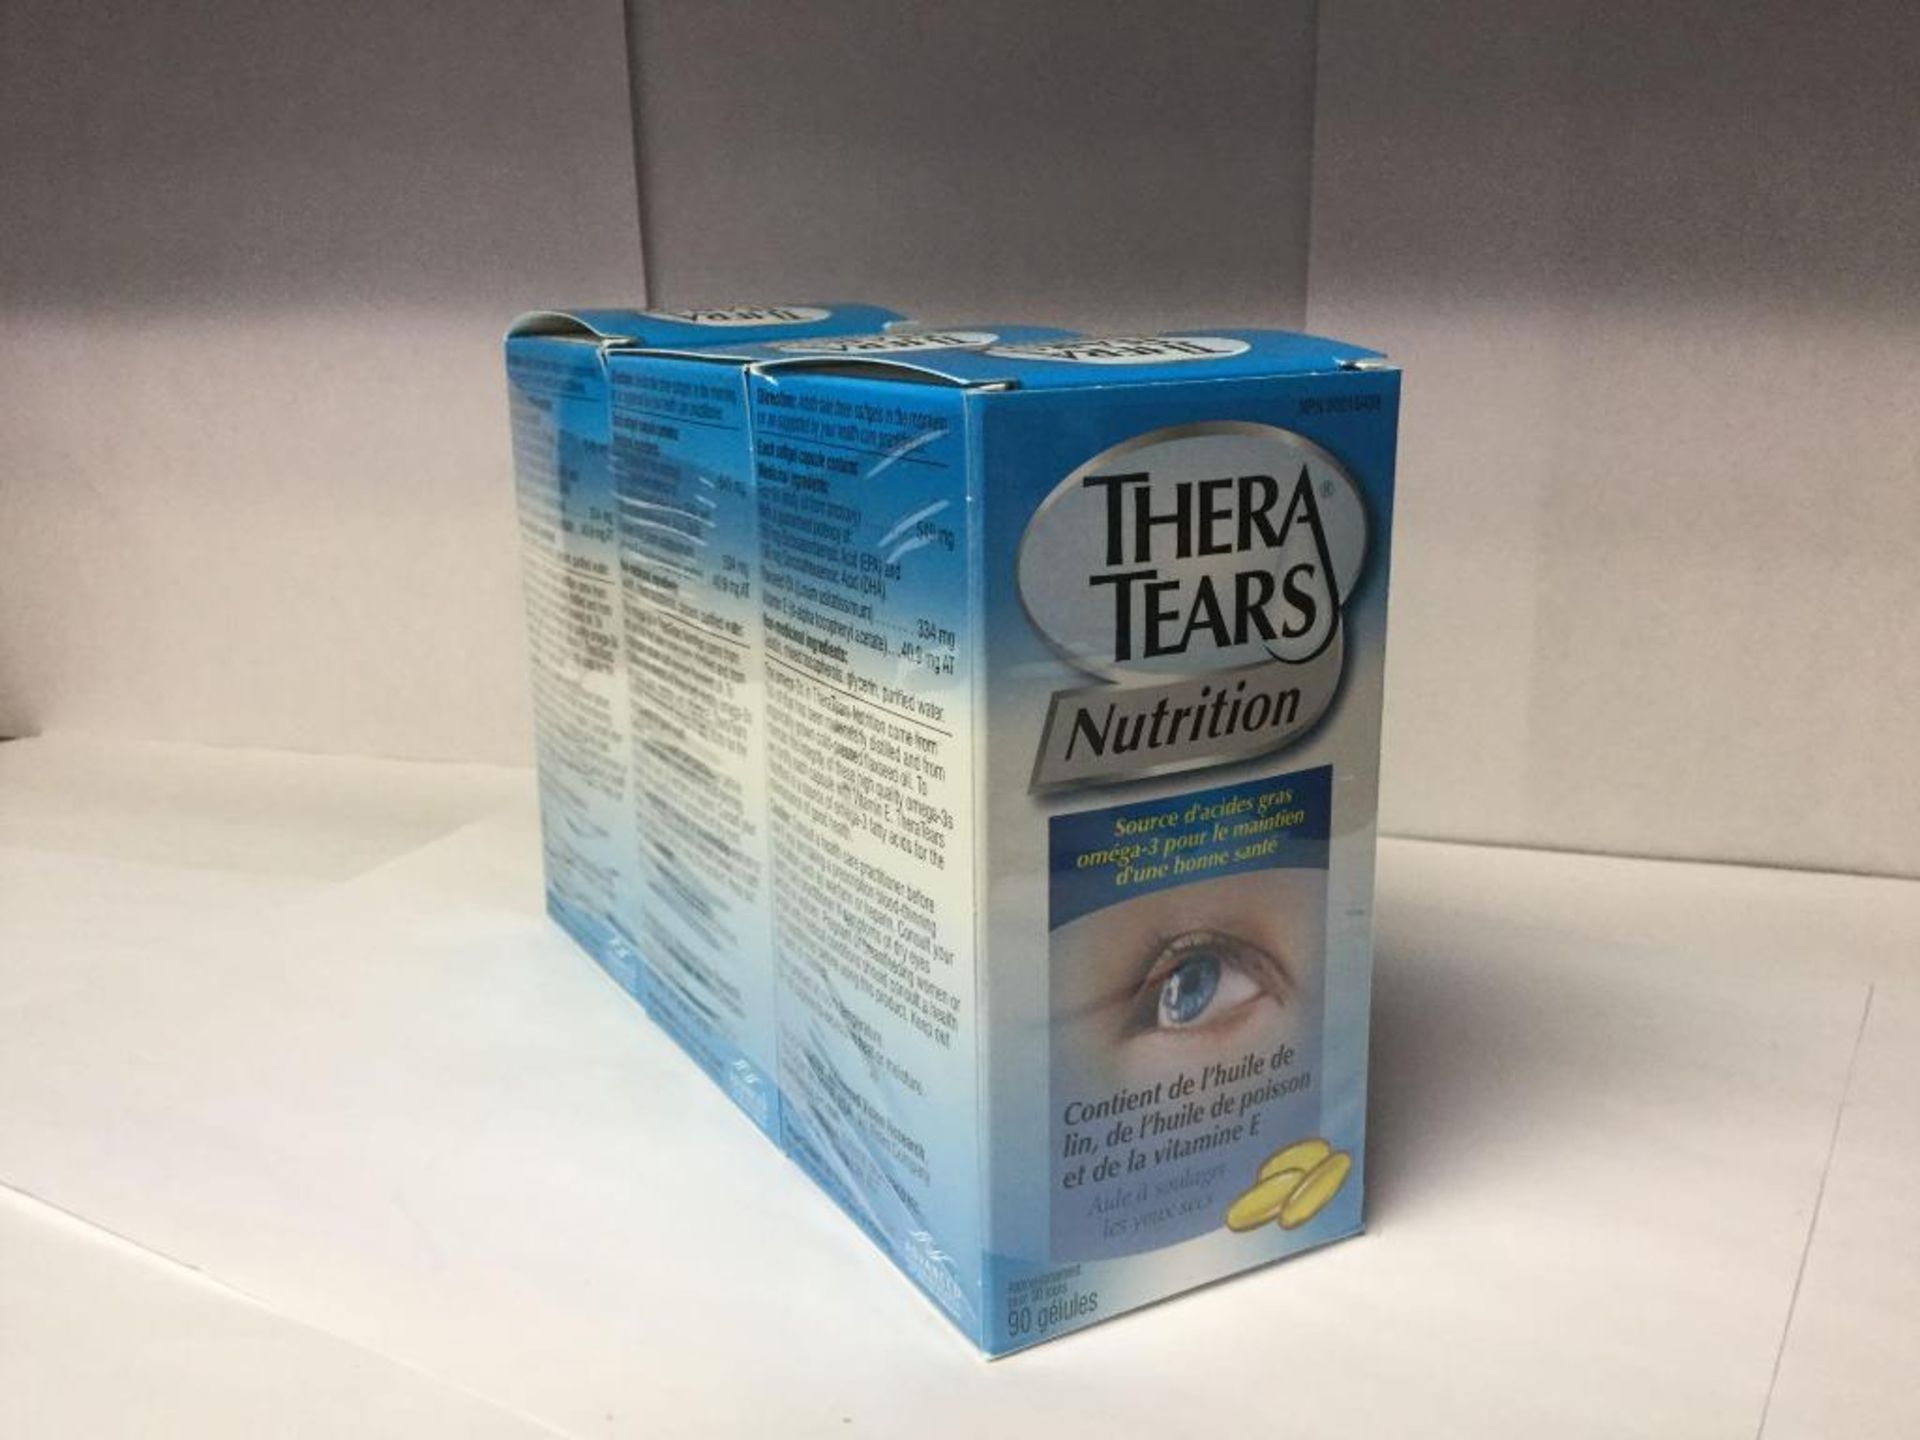 Lot of 3 x 90 Soft Gels - Thera Tears supplements